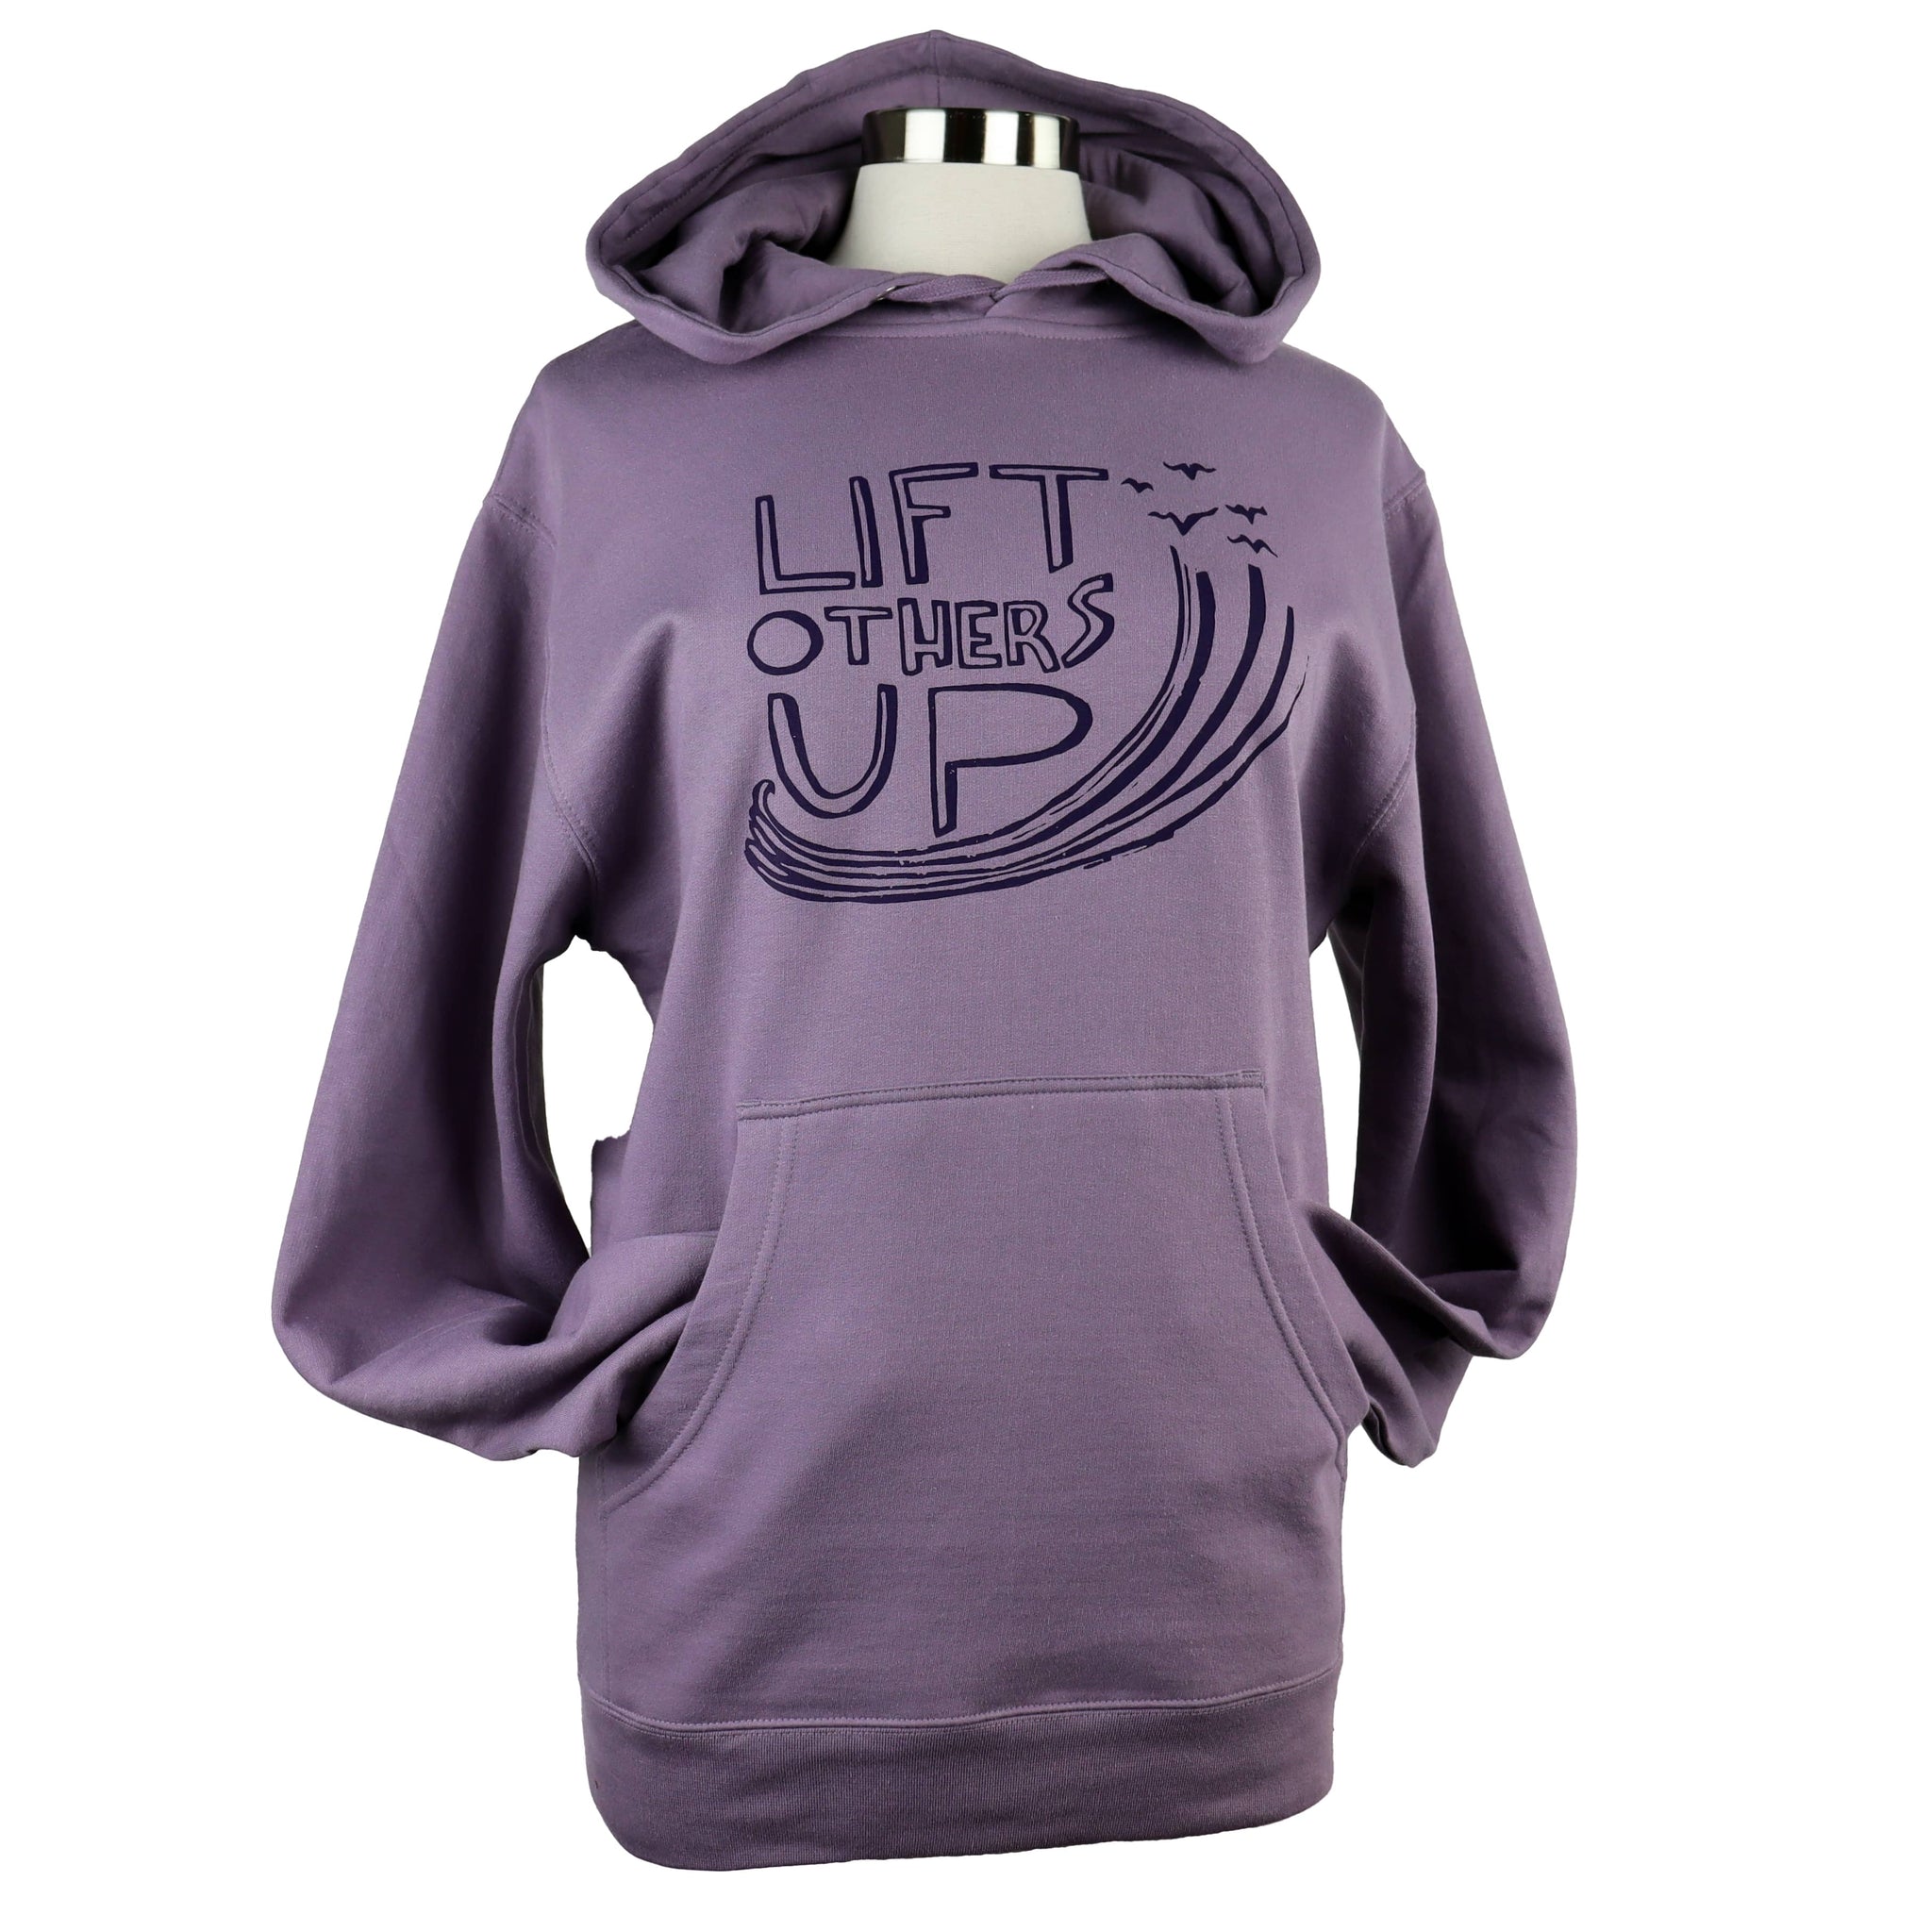 Lift Others Up Unisex Midweight Pullover Hoodie in Plum